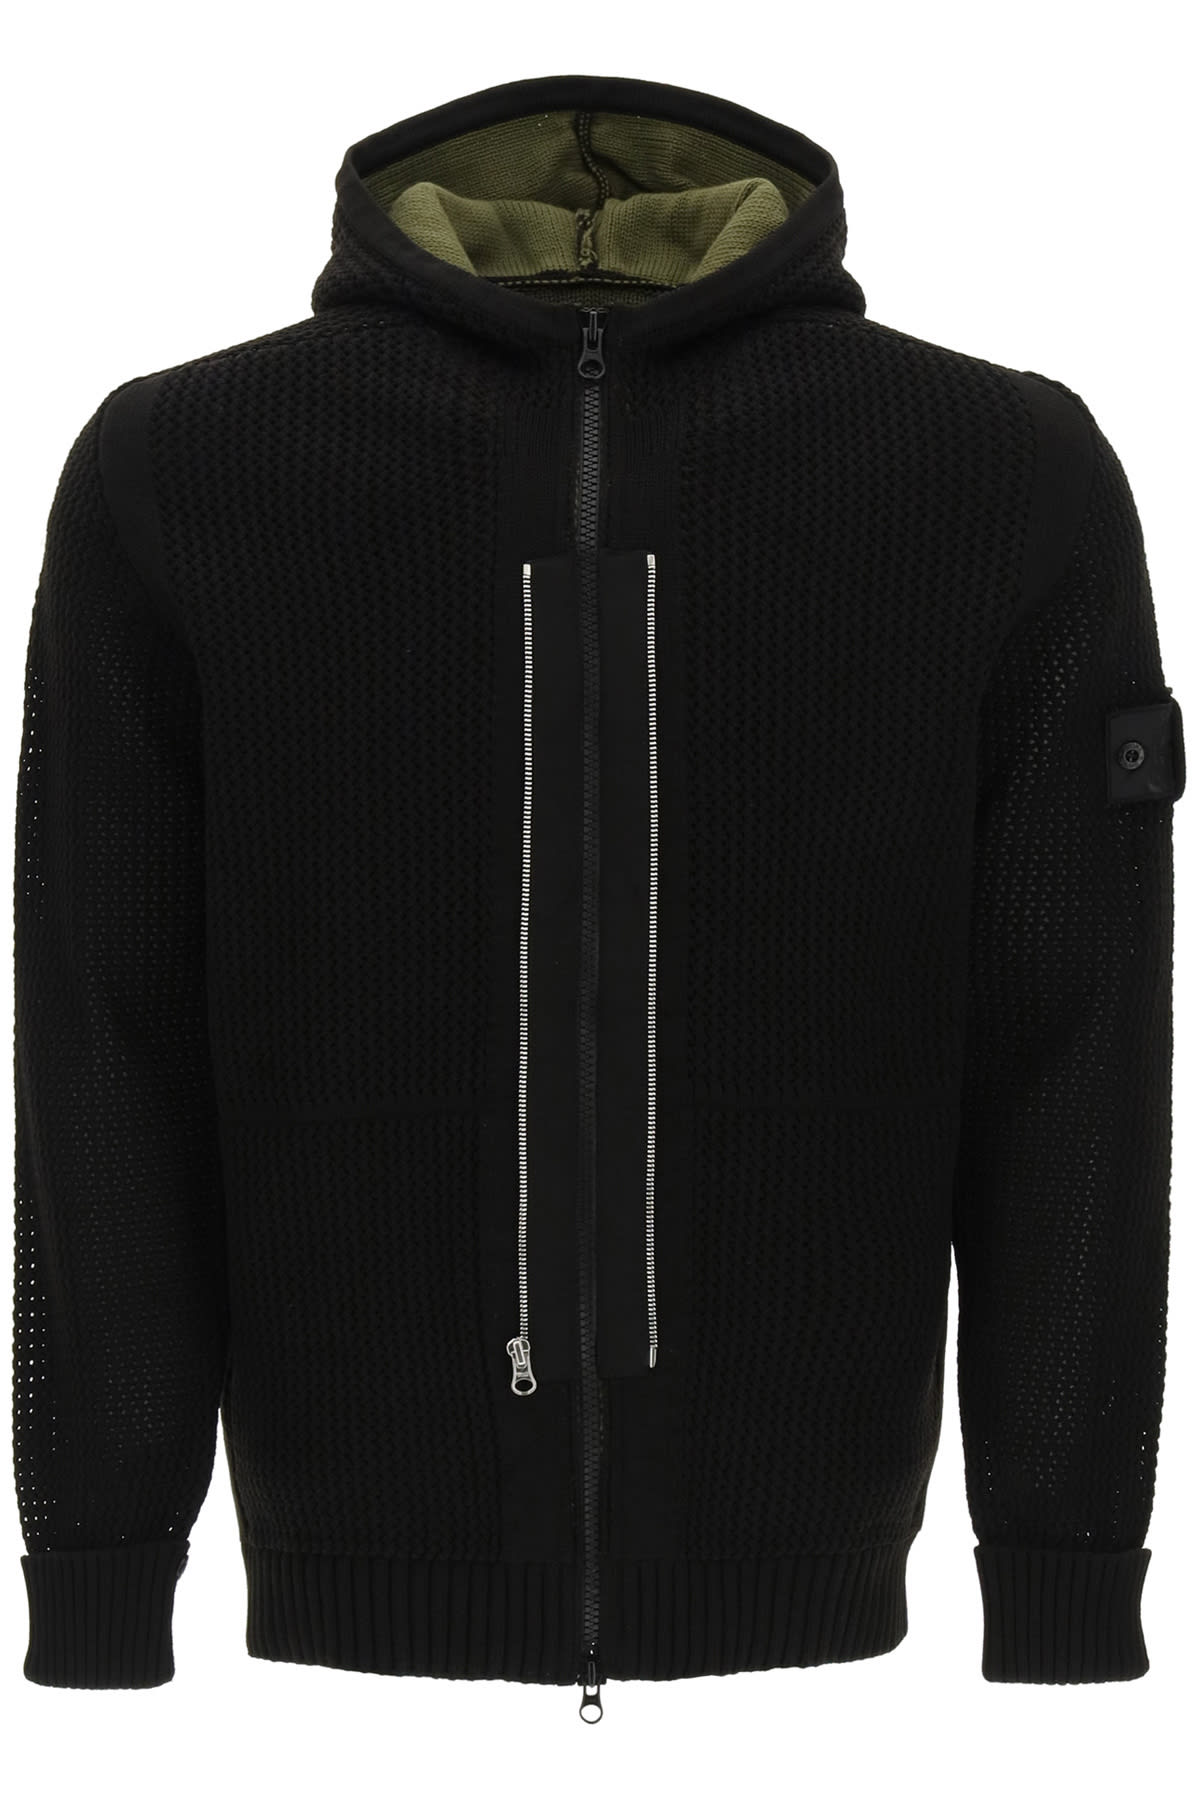 Stone Island Shadow Project Knit Hooded Jacket